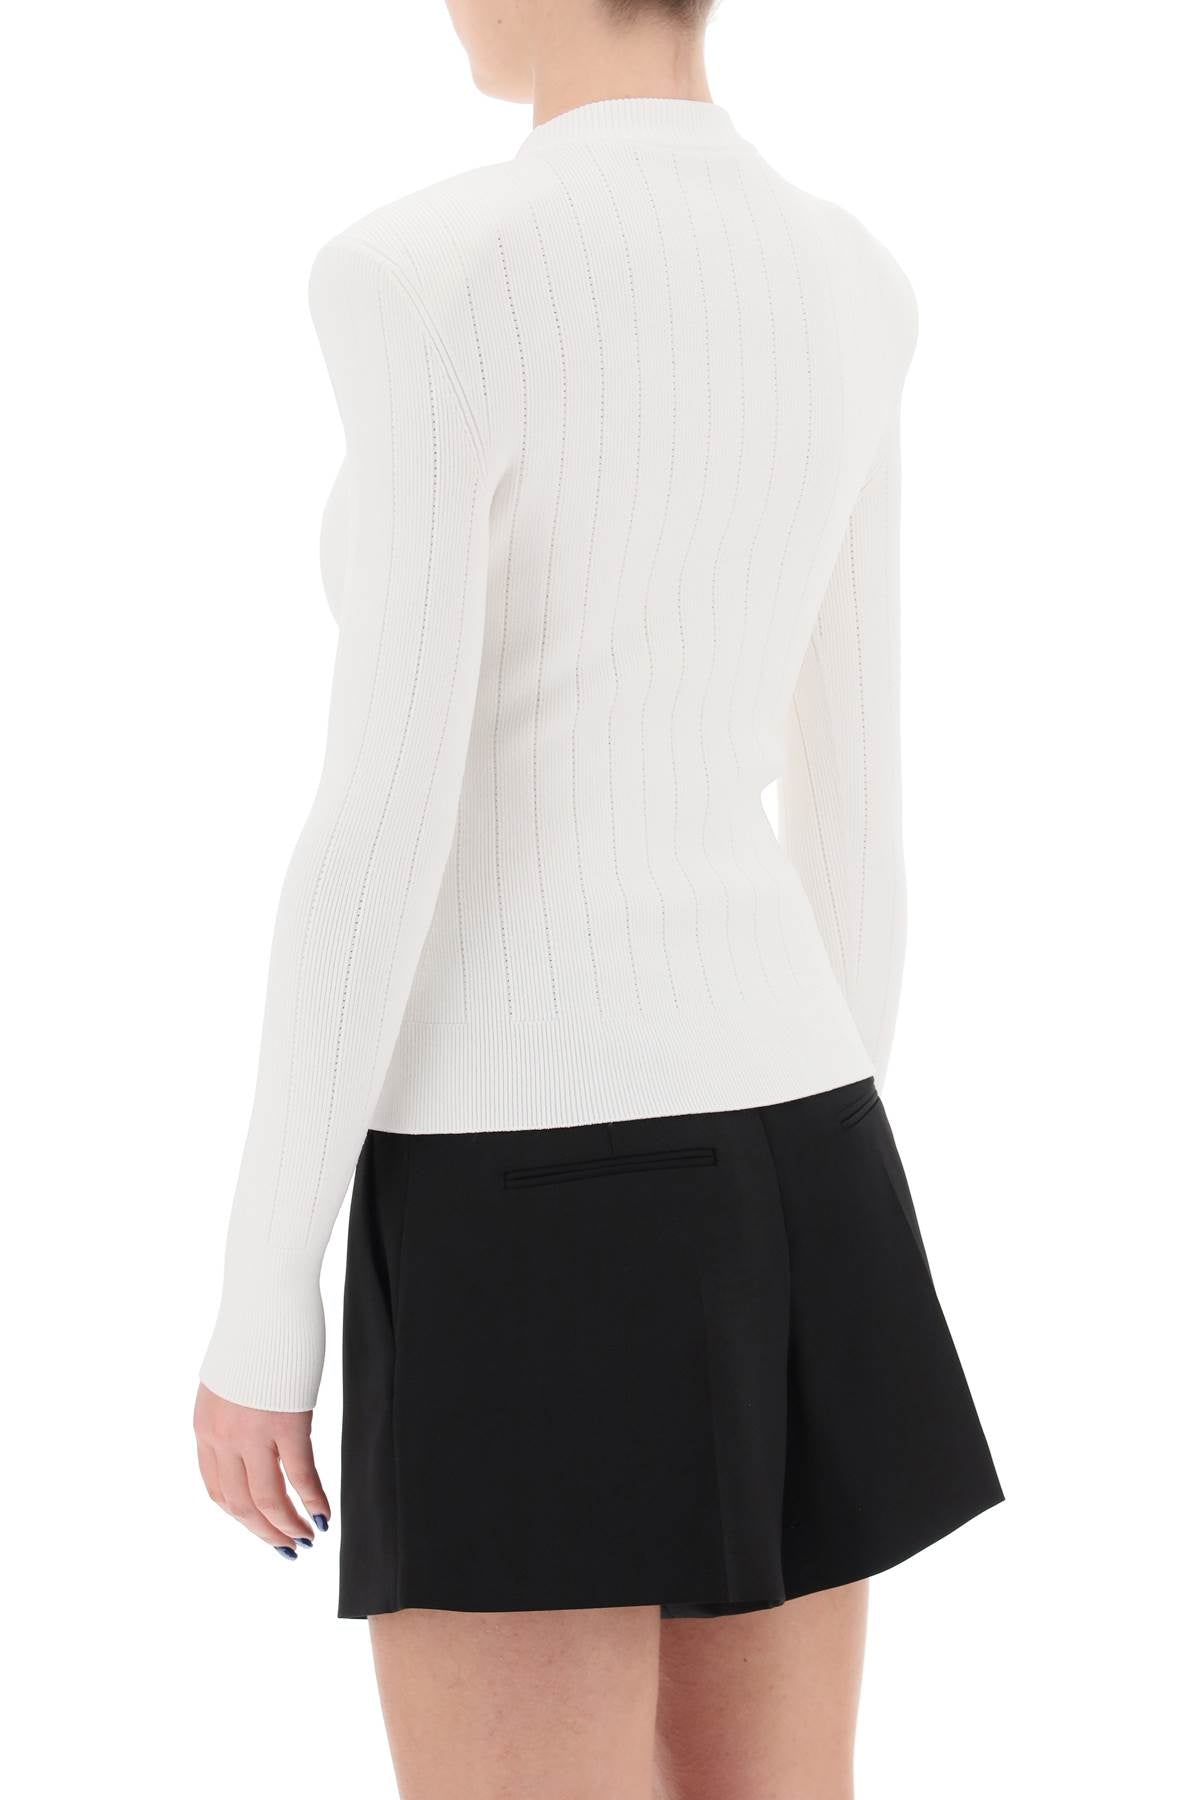 Shop Balmain White Ribbed Crew-neck Sweater For Women With Pointelle Detailing And Gold-tone Buttons